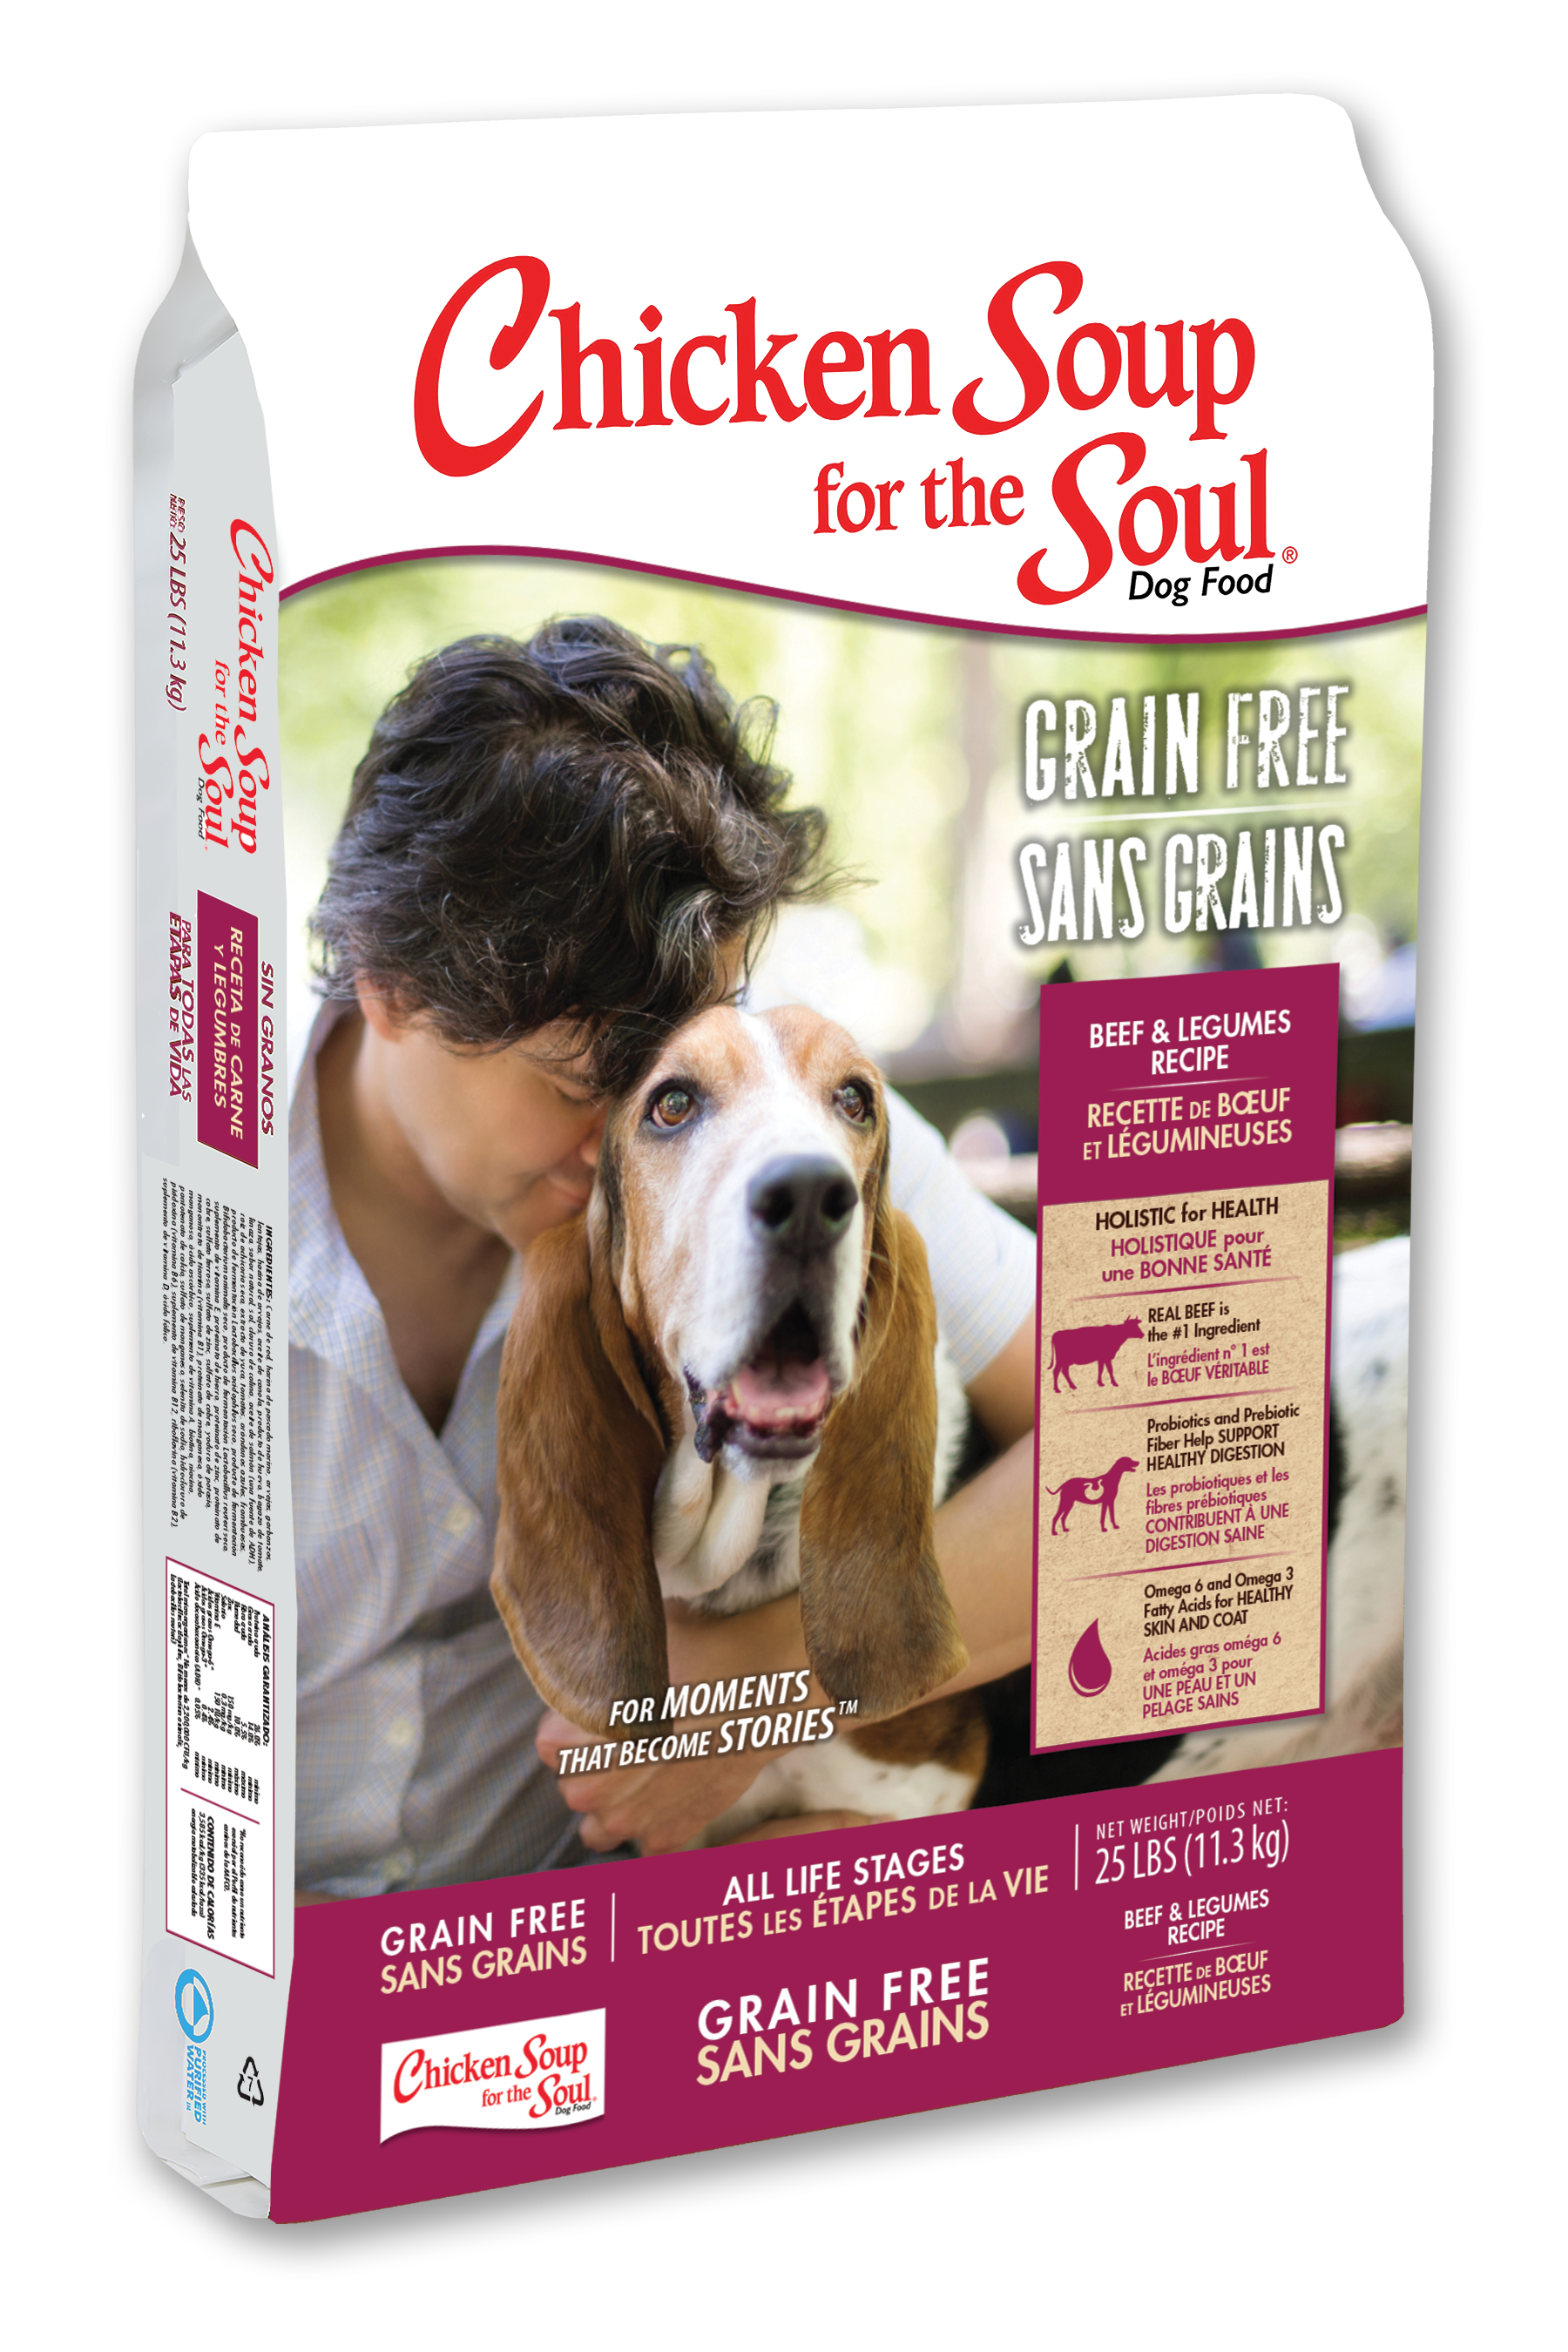 Grain Free Dog Food - Beef & Legumes Recipe | Chicken Soup for the Soul